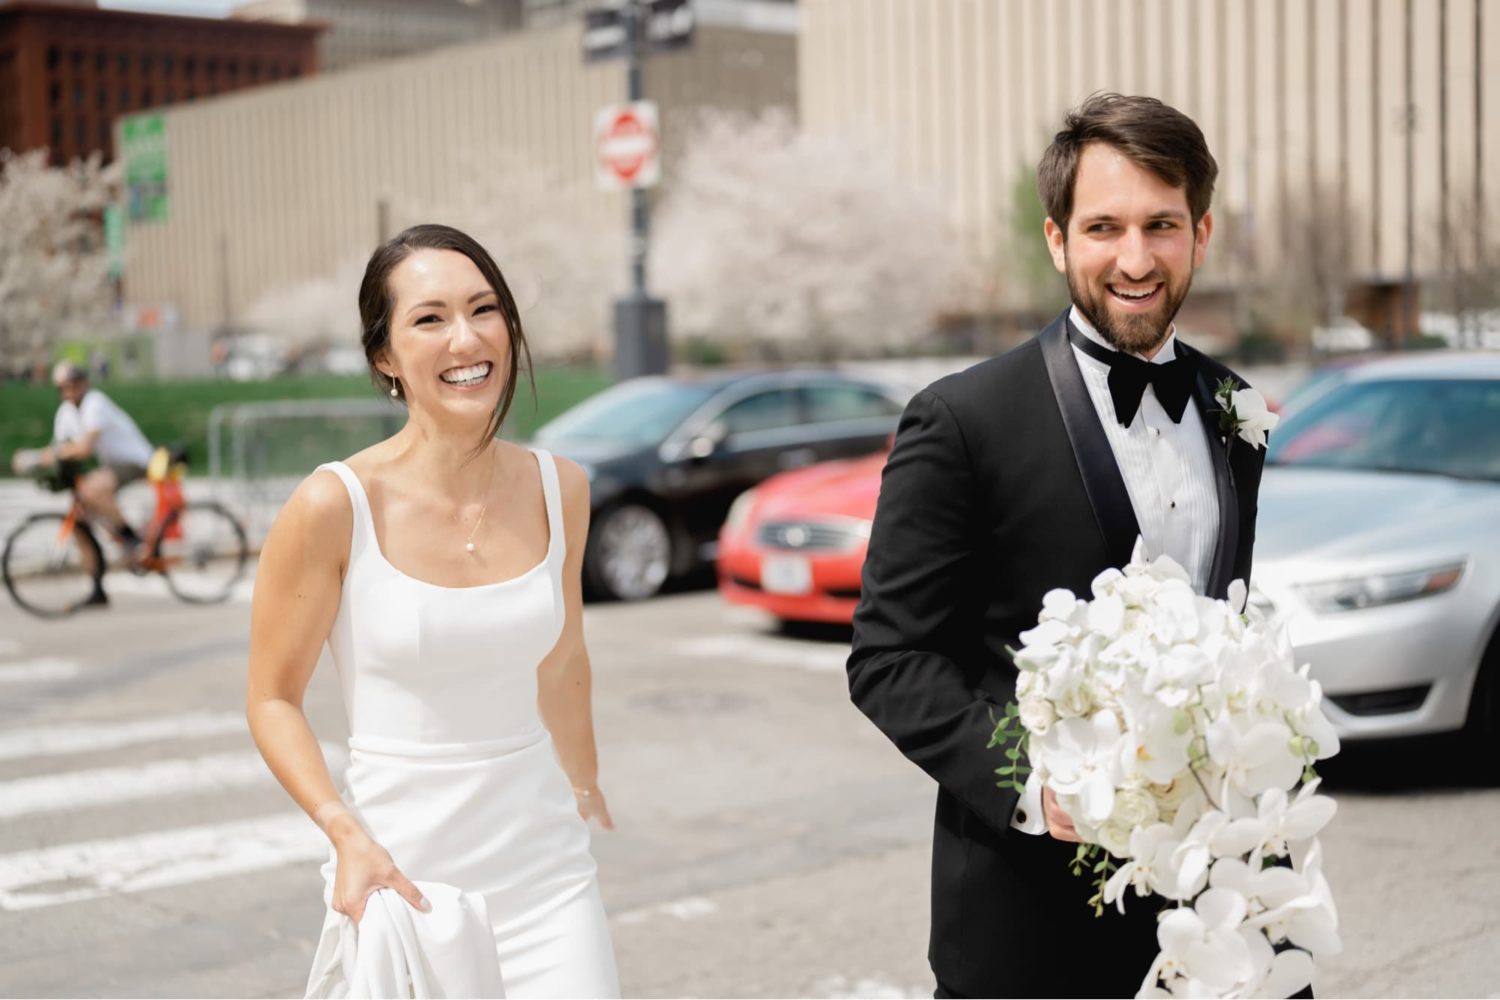 Bride and groom laughing walking across the street